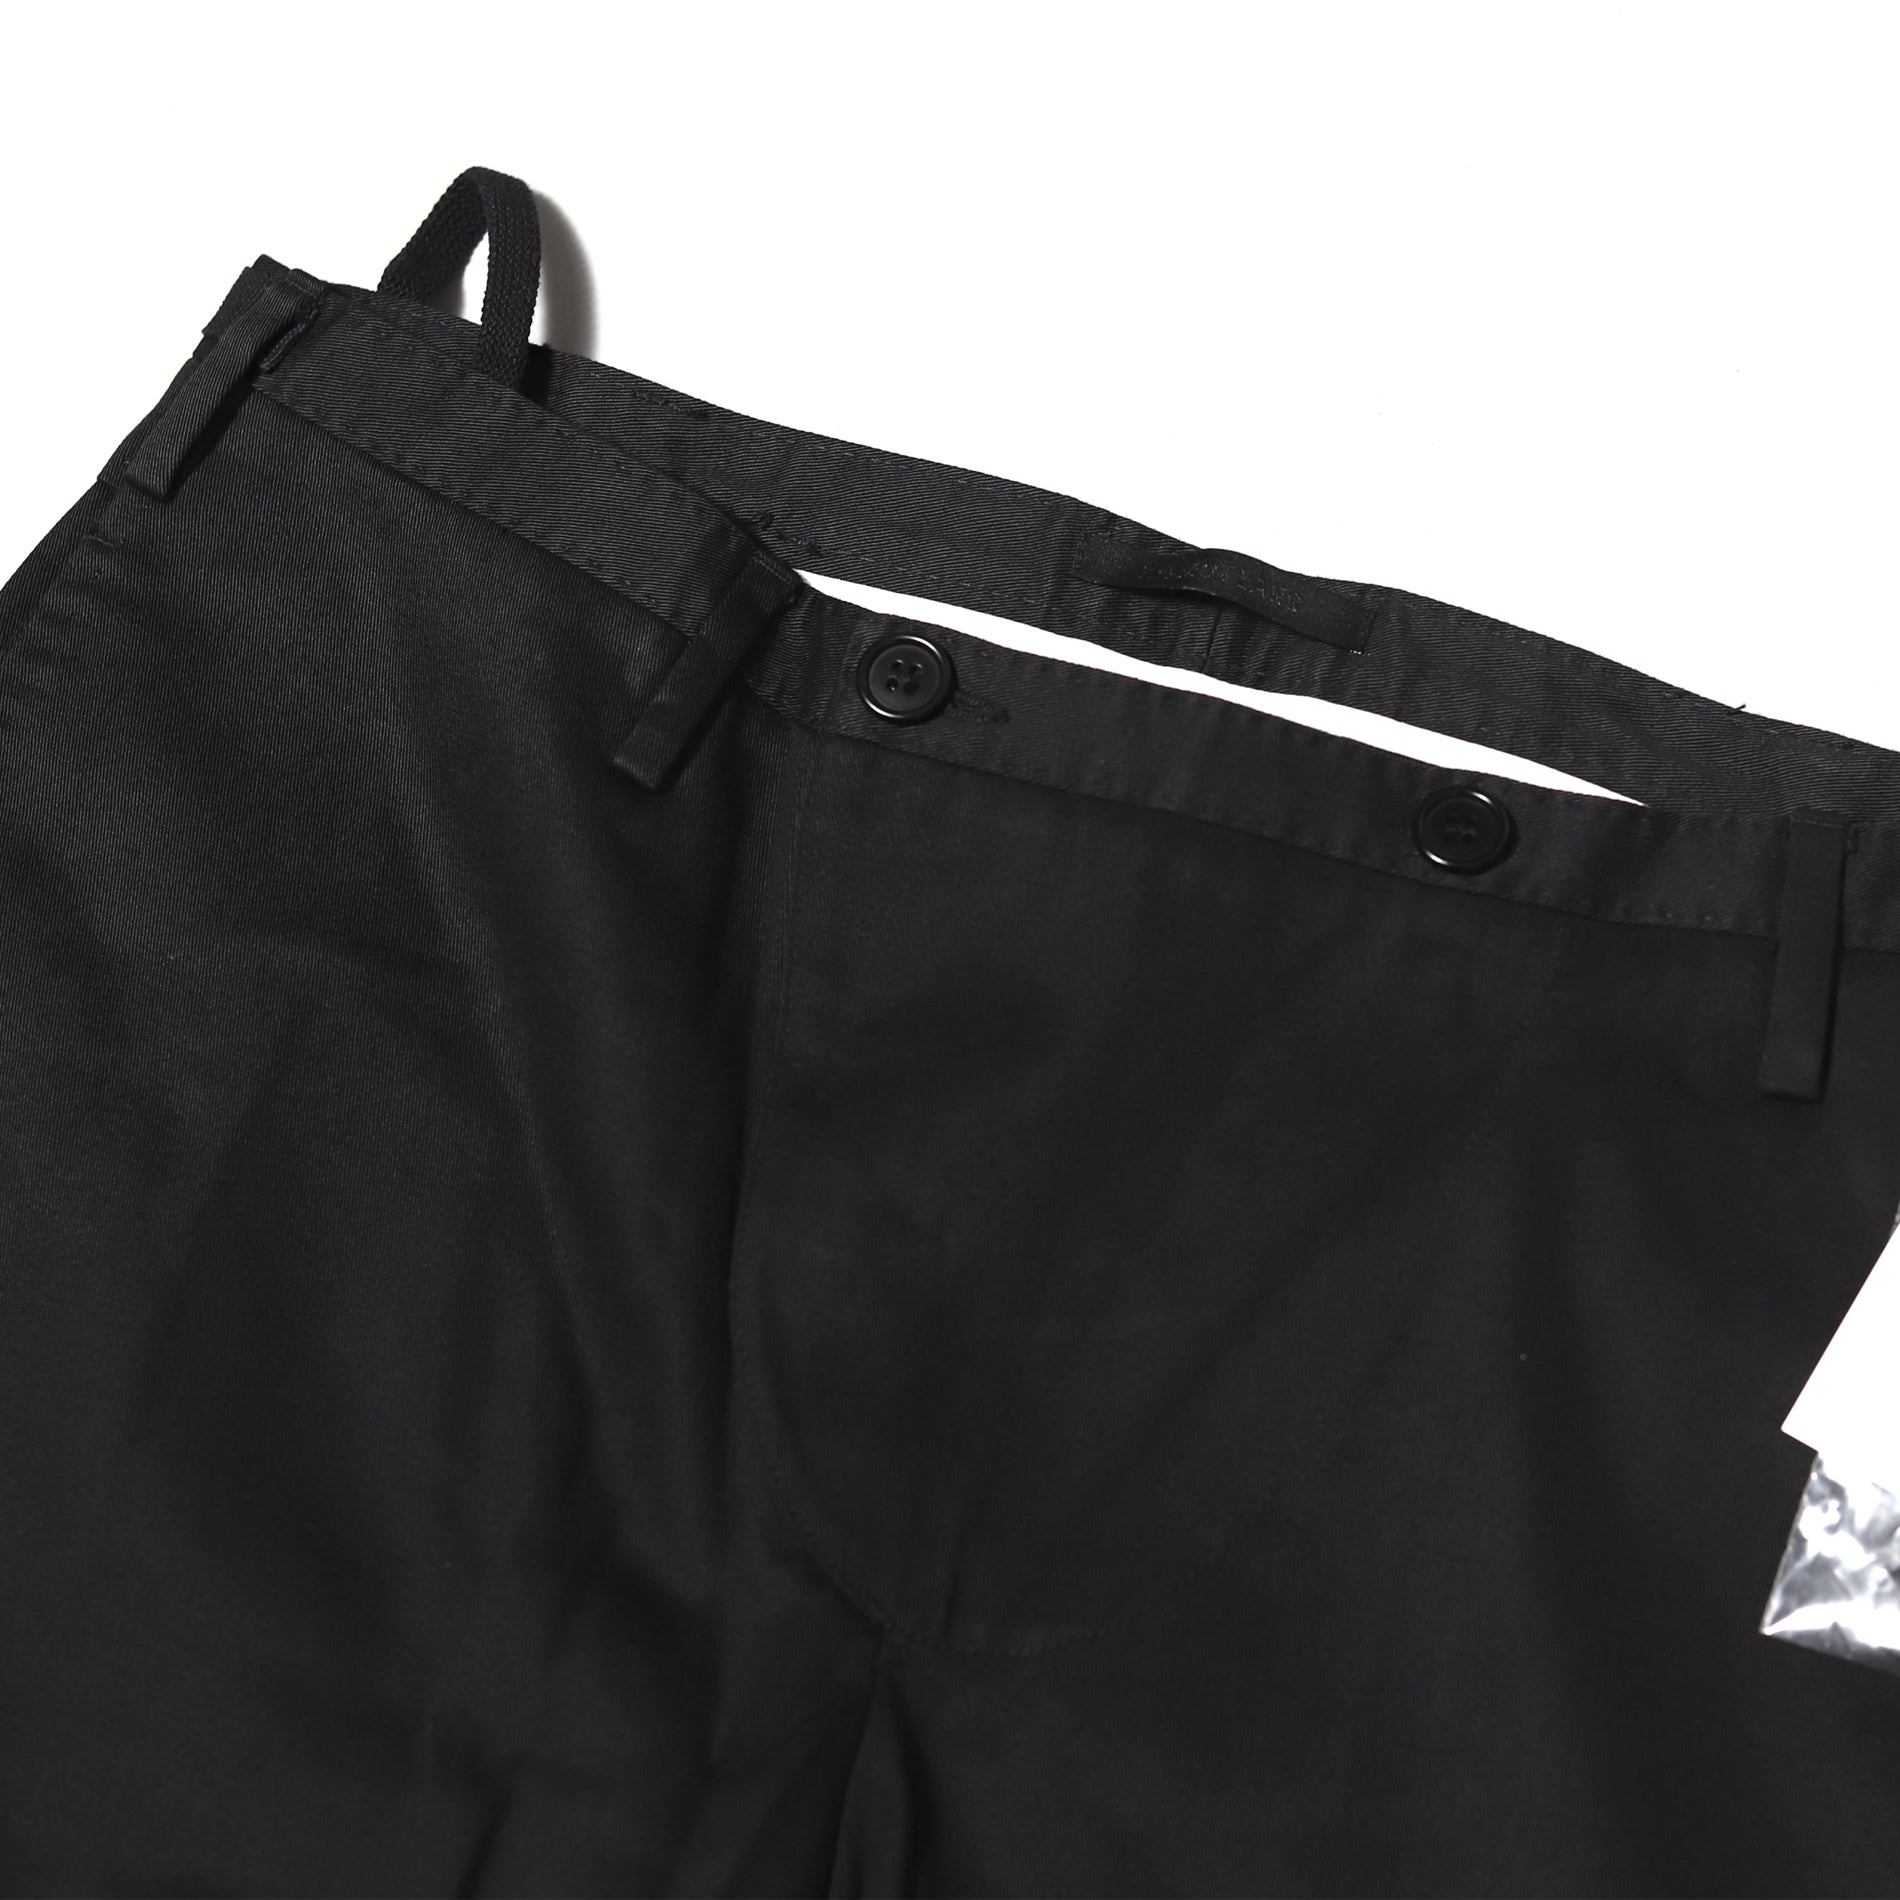 Helmut Lang Archival Black Chino Compact Twill